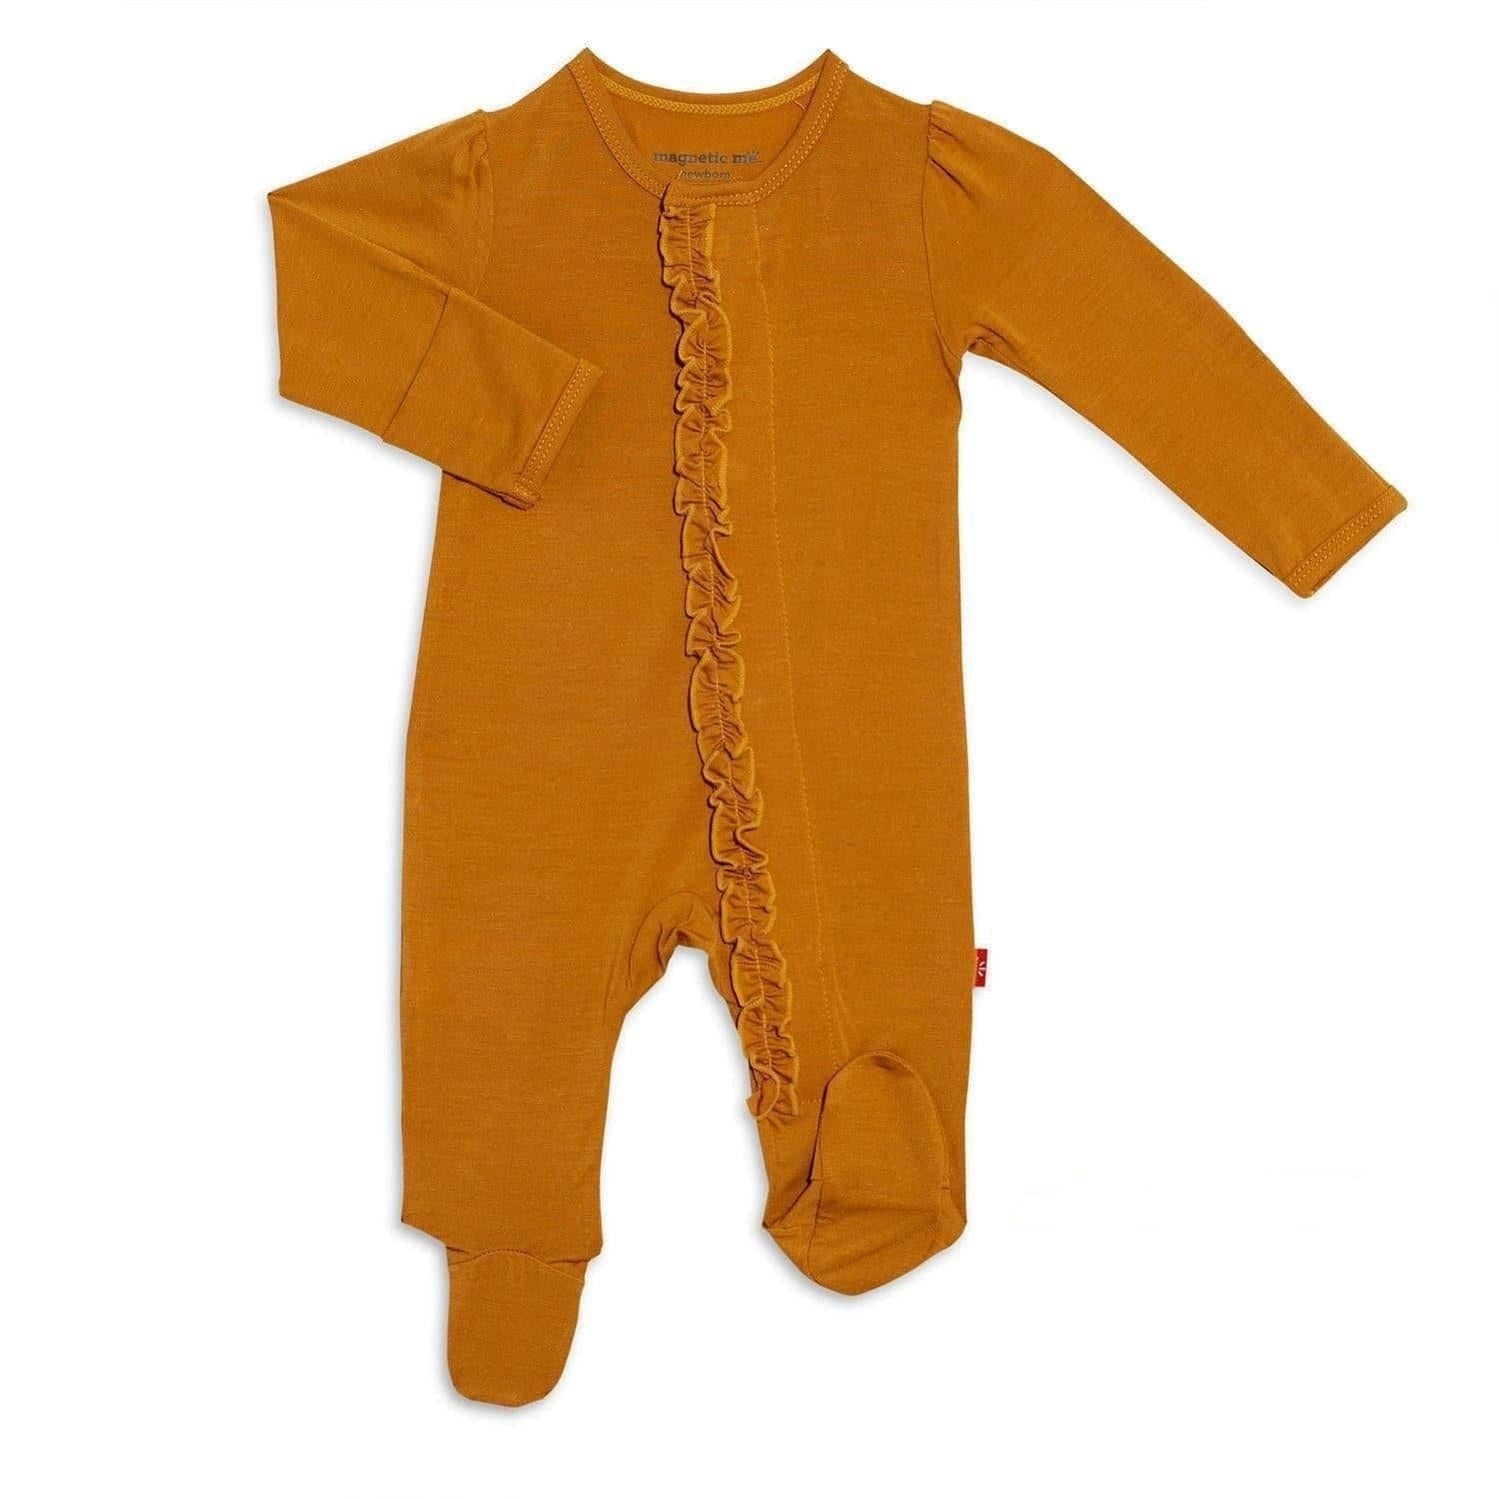 Magnetic Me Flaxen Gold Modal Magnetic Footie - ANB Baby -842999175839$20 - $50